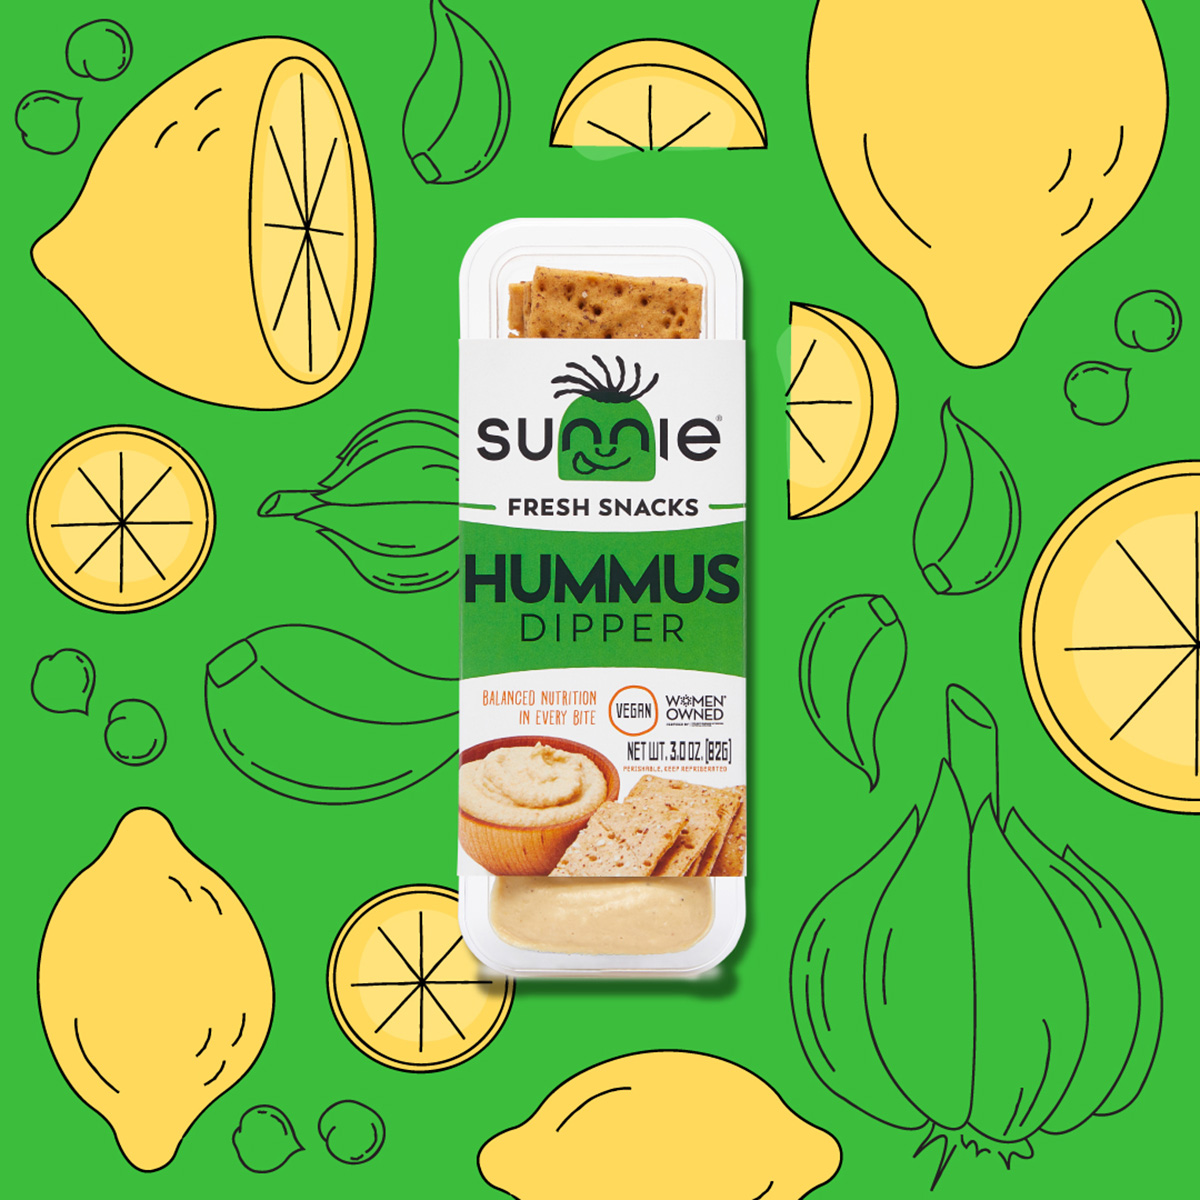 Sunnie Hummus Dipper Product Image